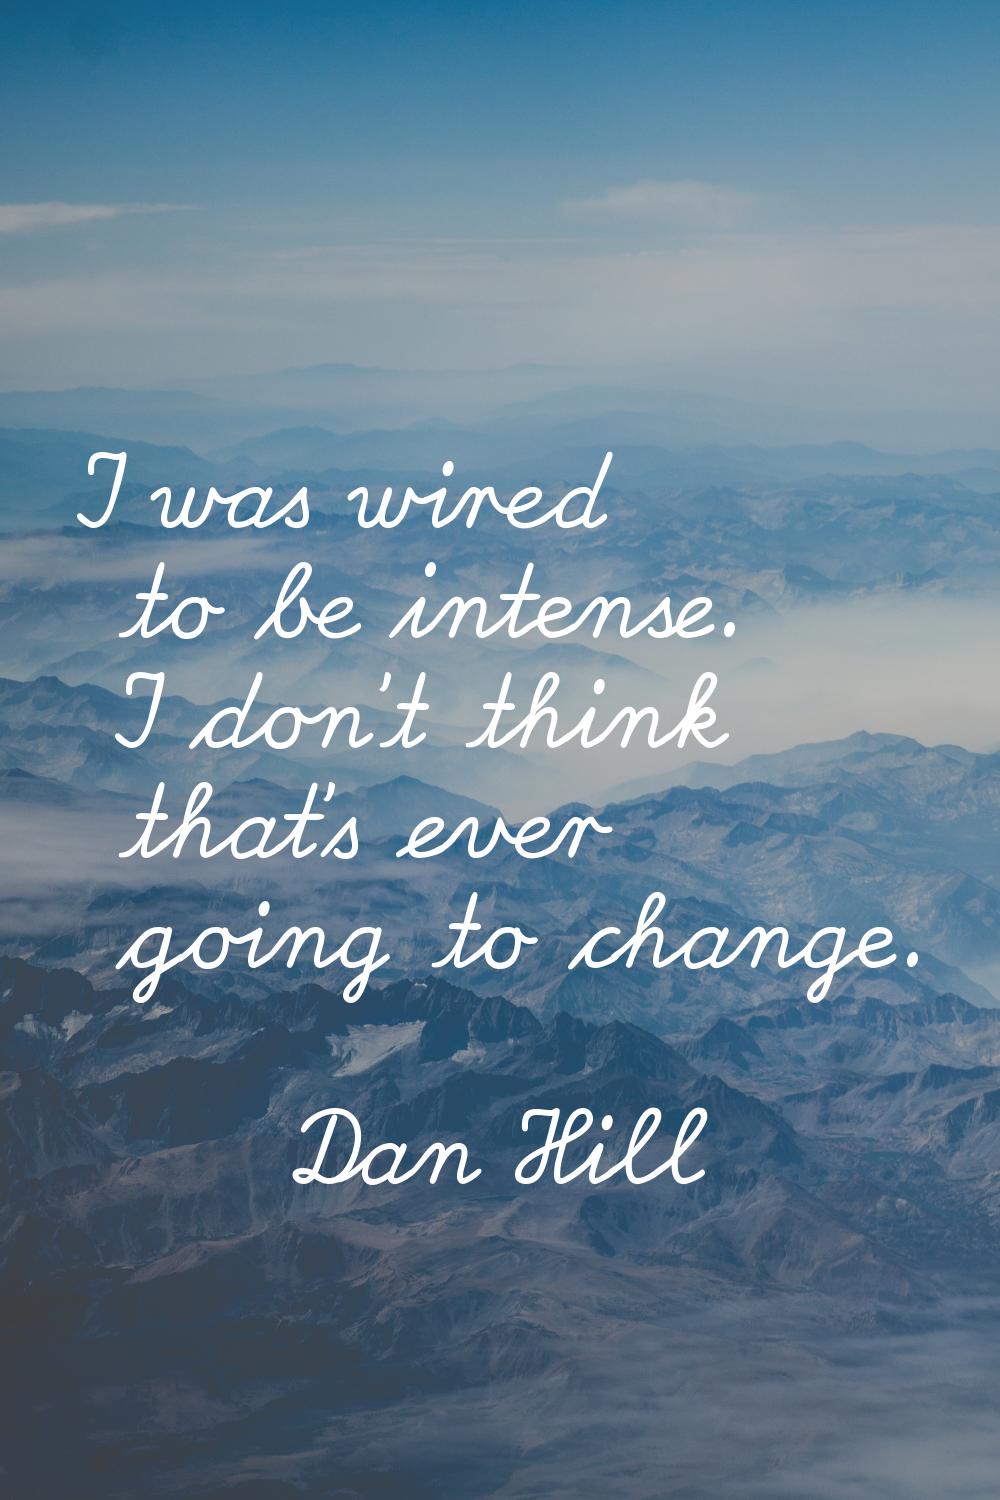 I was wired to be intense. I don't think that's ever going to change.